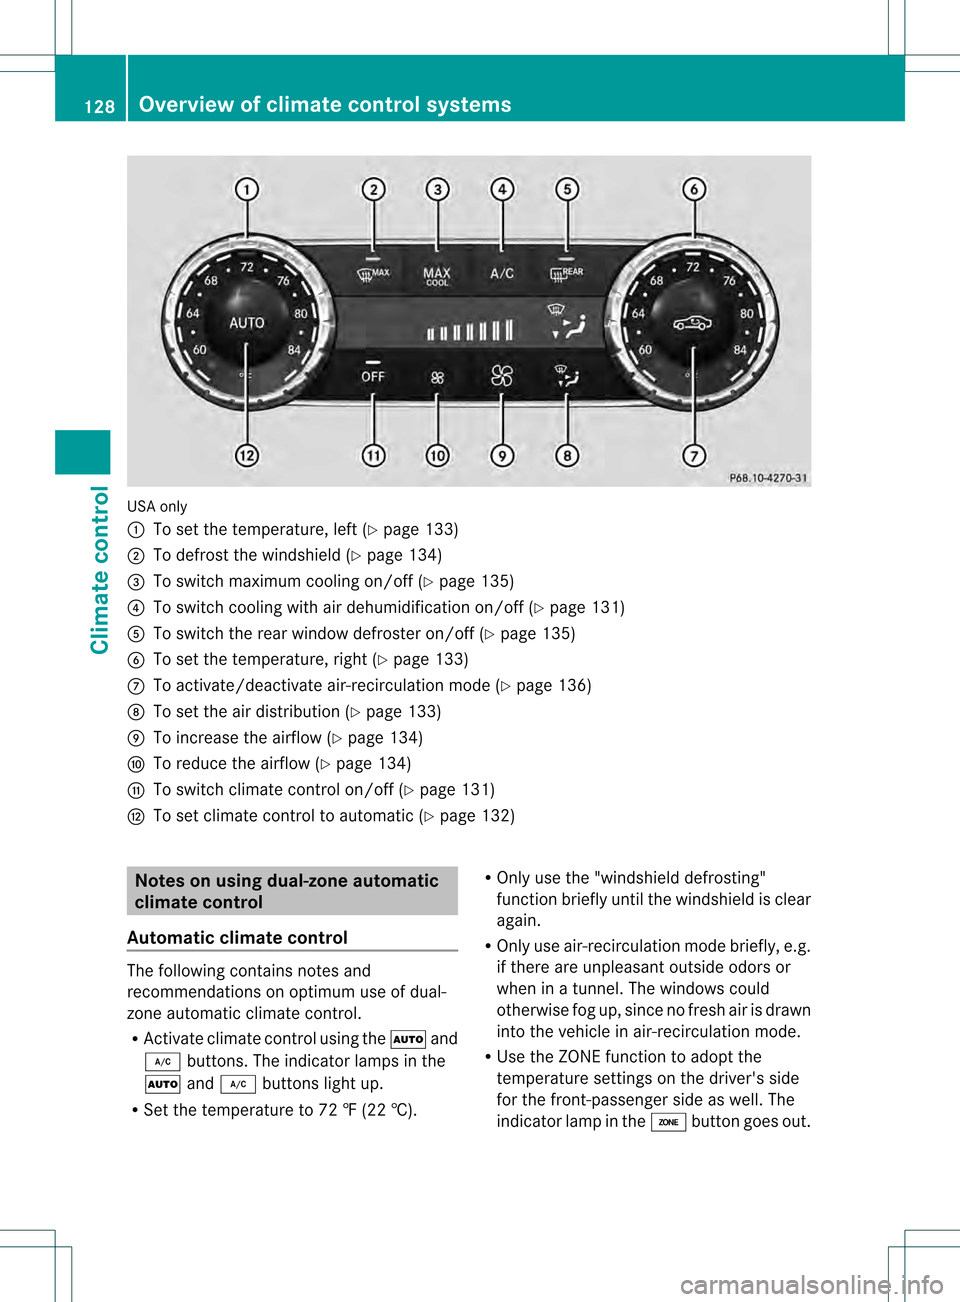 MERCEDES-BENZ C-Class SEDAN 2013 W204 Owners Manual USA only
0002
To set the temperature, left (Y page 133)
0003 To defrost the windshield (Y page 134)
0022 To switch maximum cooling on/off (Y page 135)
0021 To switch cooling with air dehumidification 